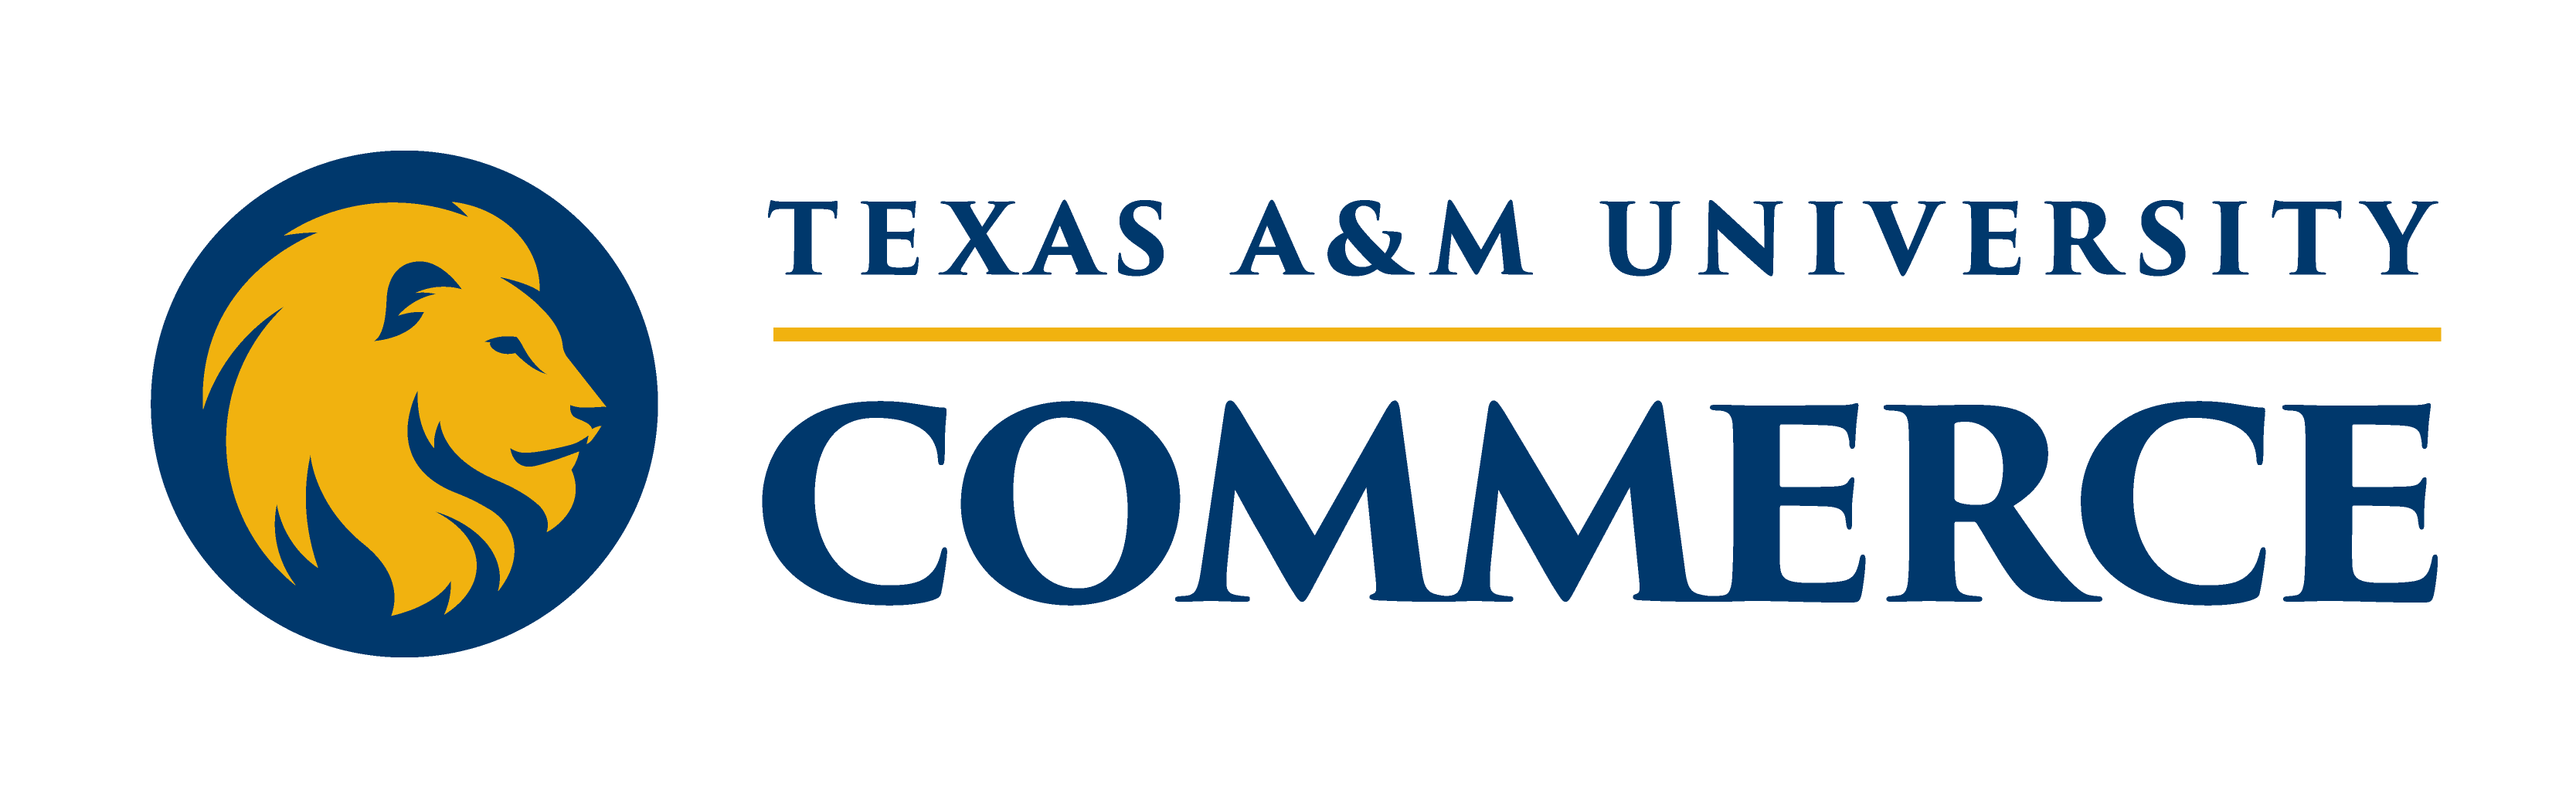 Texas A&M University-Commerce | Transforming East Texas through Research,  Education, and Service - Texas A&M University-Commerce